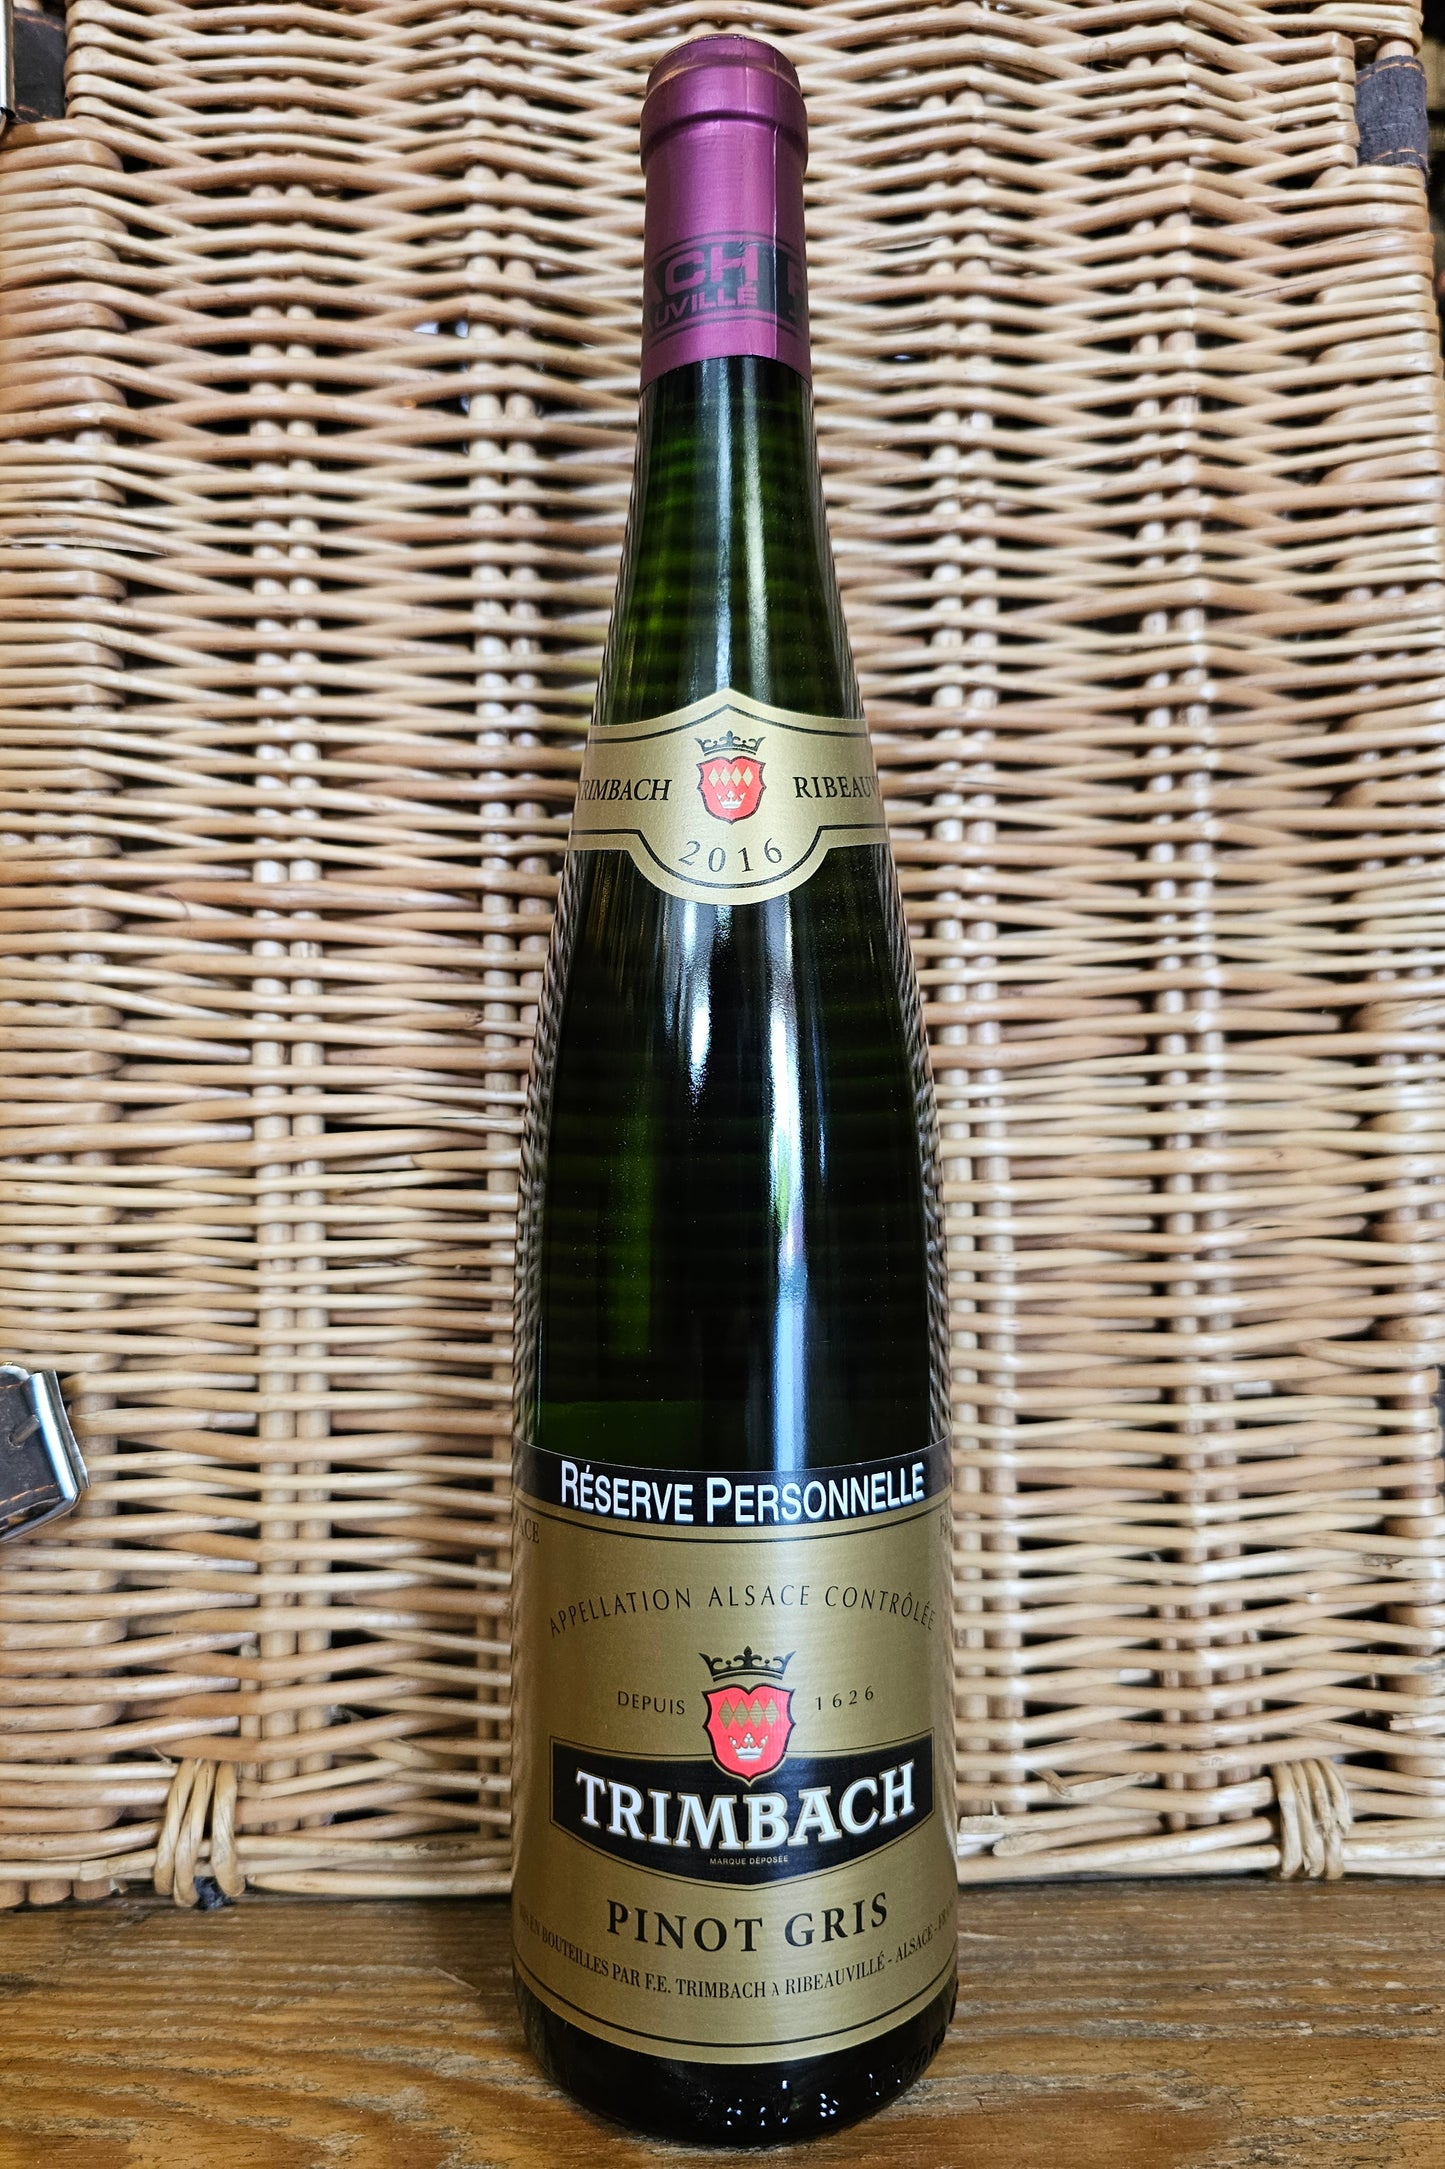 Trimbach, Reserve Personnelle Pinot Gris, 2016